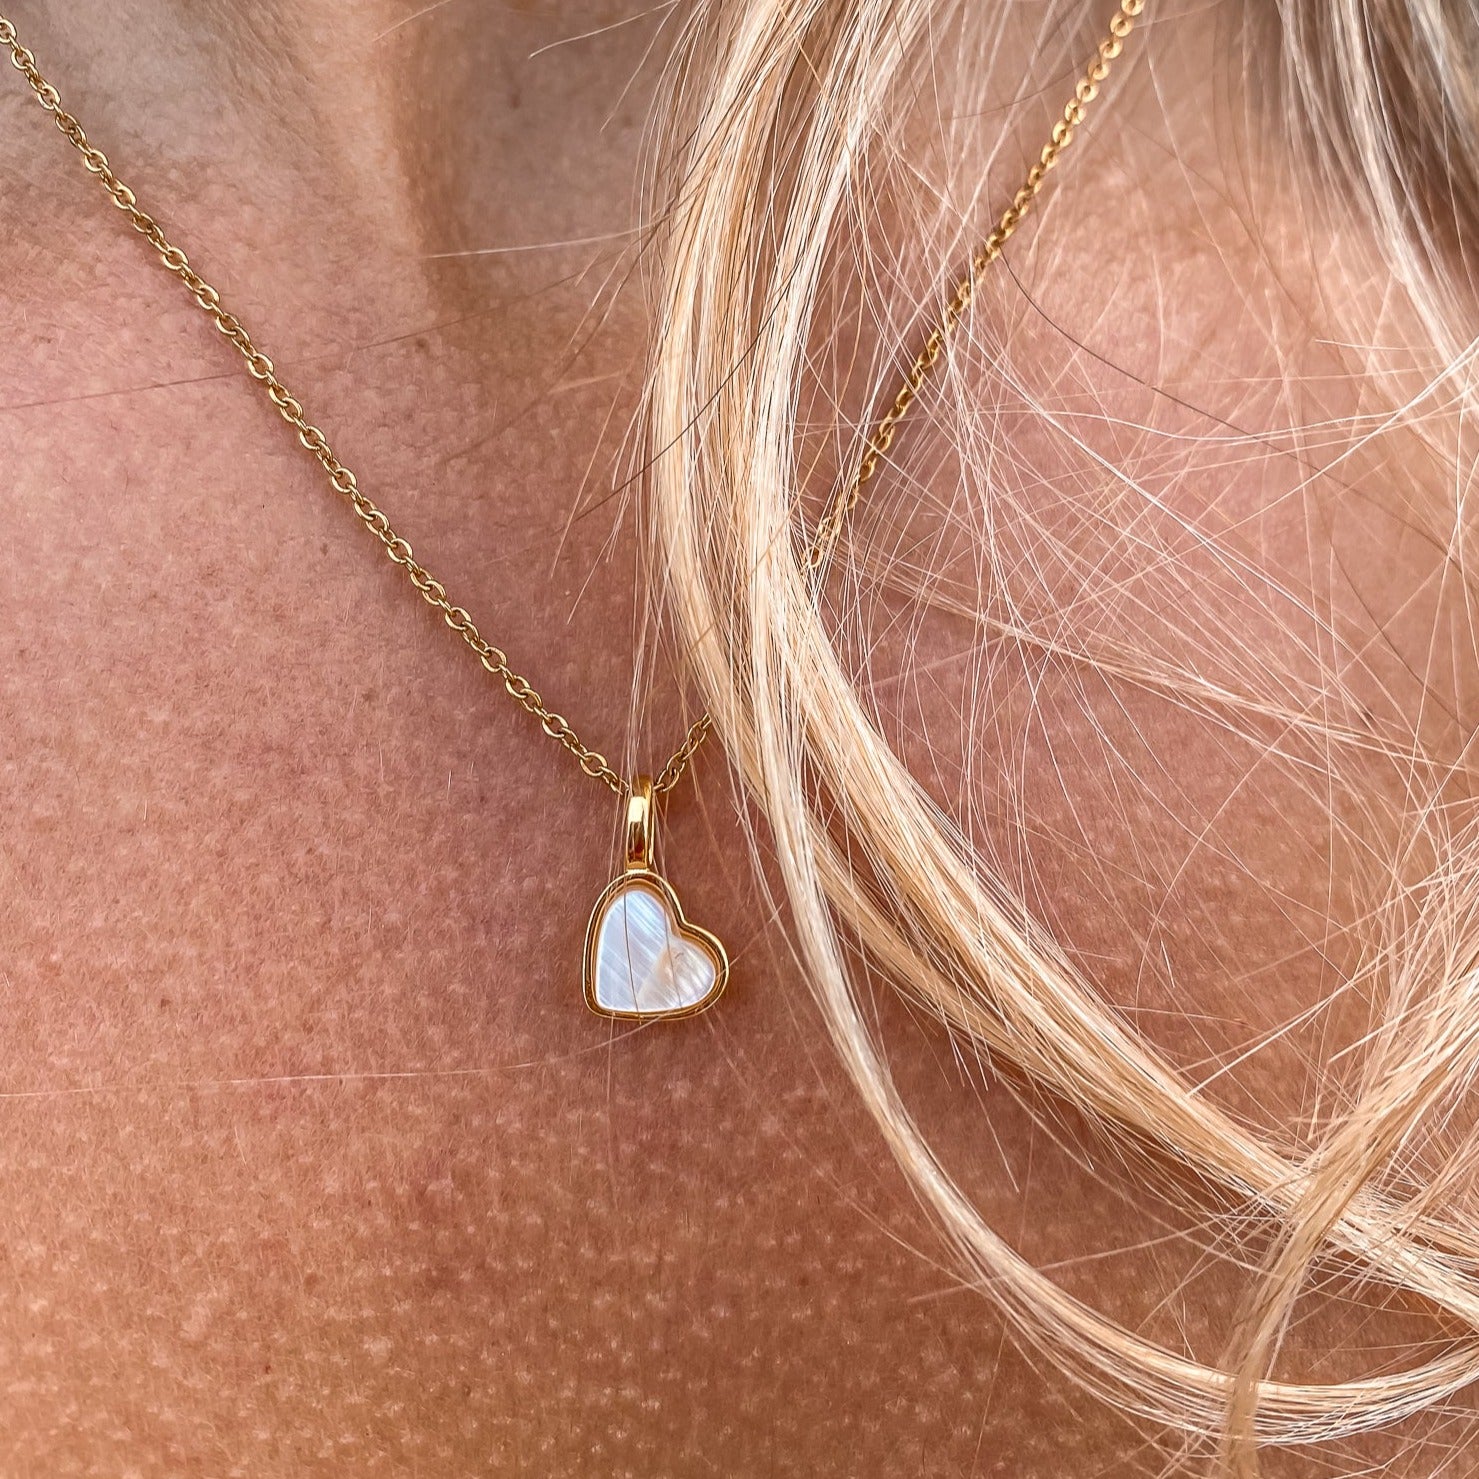 Yellow Gold plated charm necklace with a heart shaped mother-of-pearl pendant. Wedding and bridal jewelry. Great gift fro brides, bridesmaid and maid of honor made by Born to Rock . Jewelry store based in San Diego California